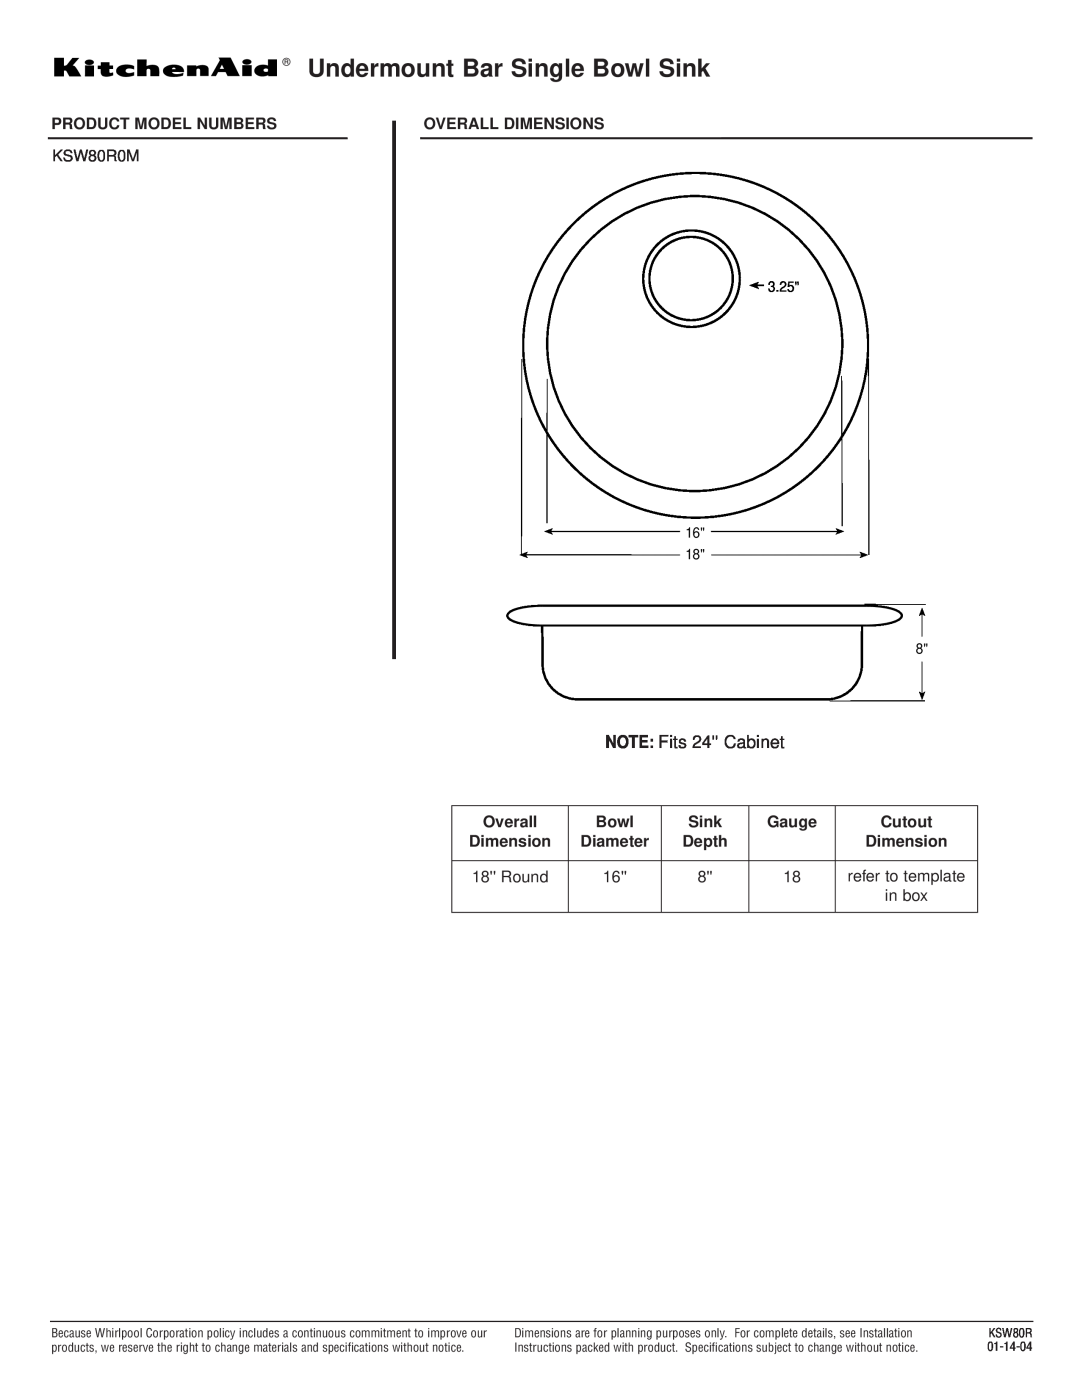 KitchenAid KSW80R specifications Undermount Bar Single Bowl Sink, NOTE Fits 24 Cabinet 